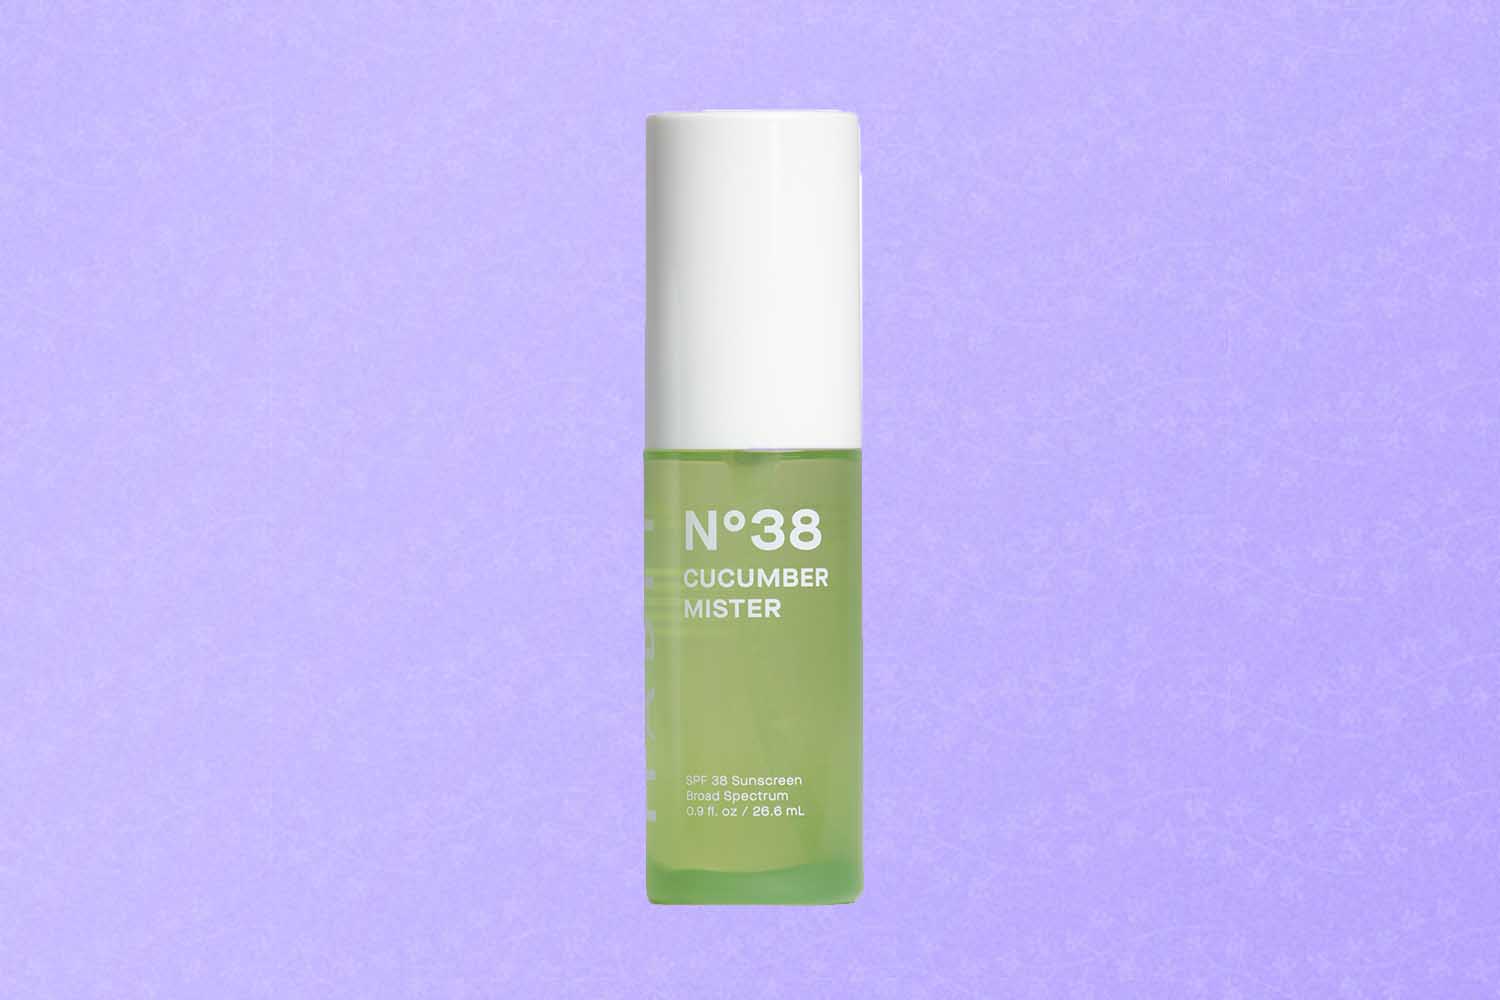 A bottle of SPF mist, a perfect Mother's Day gift for 2022, on a purple background.